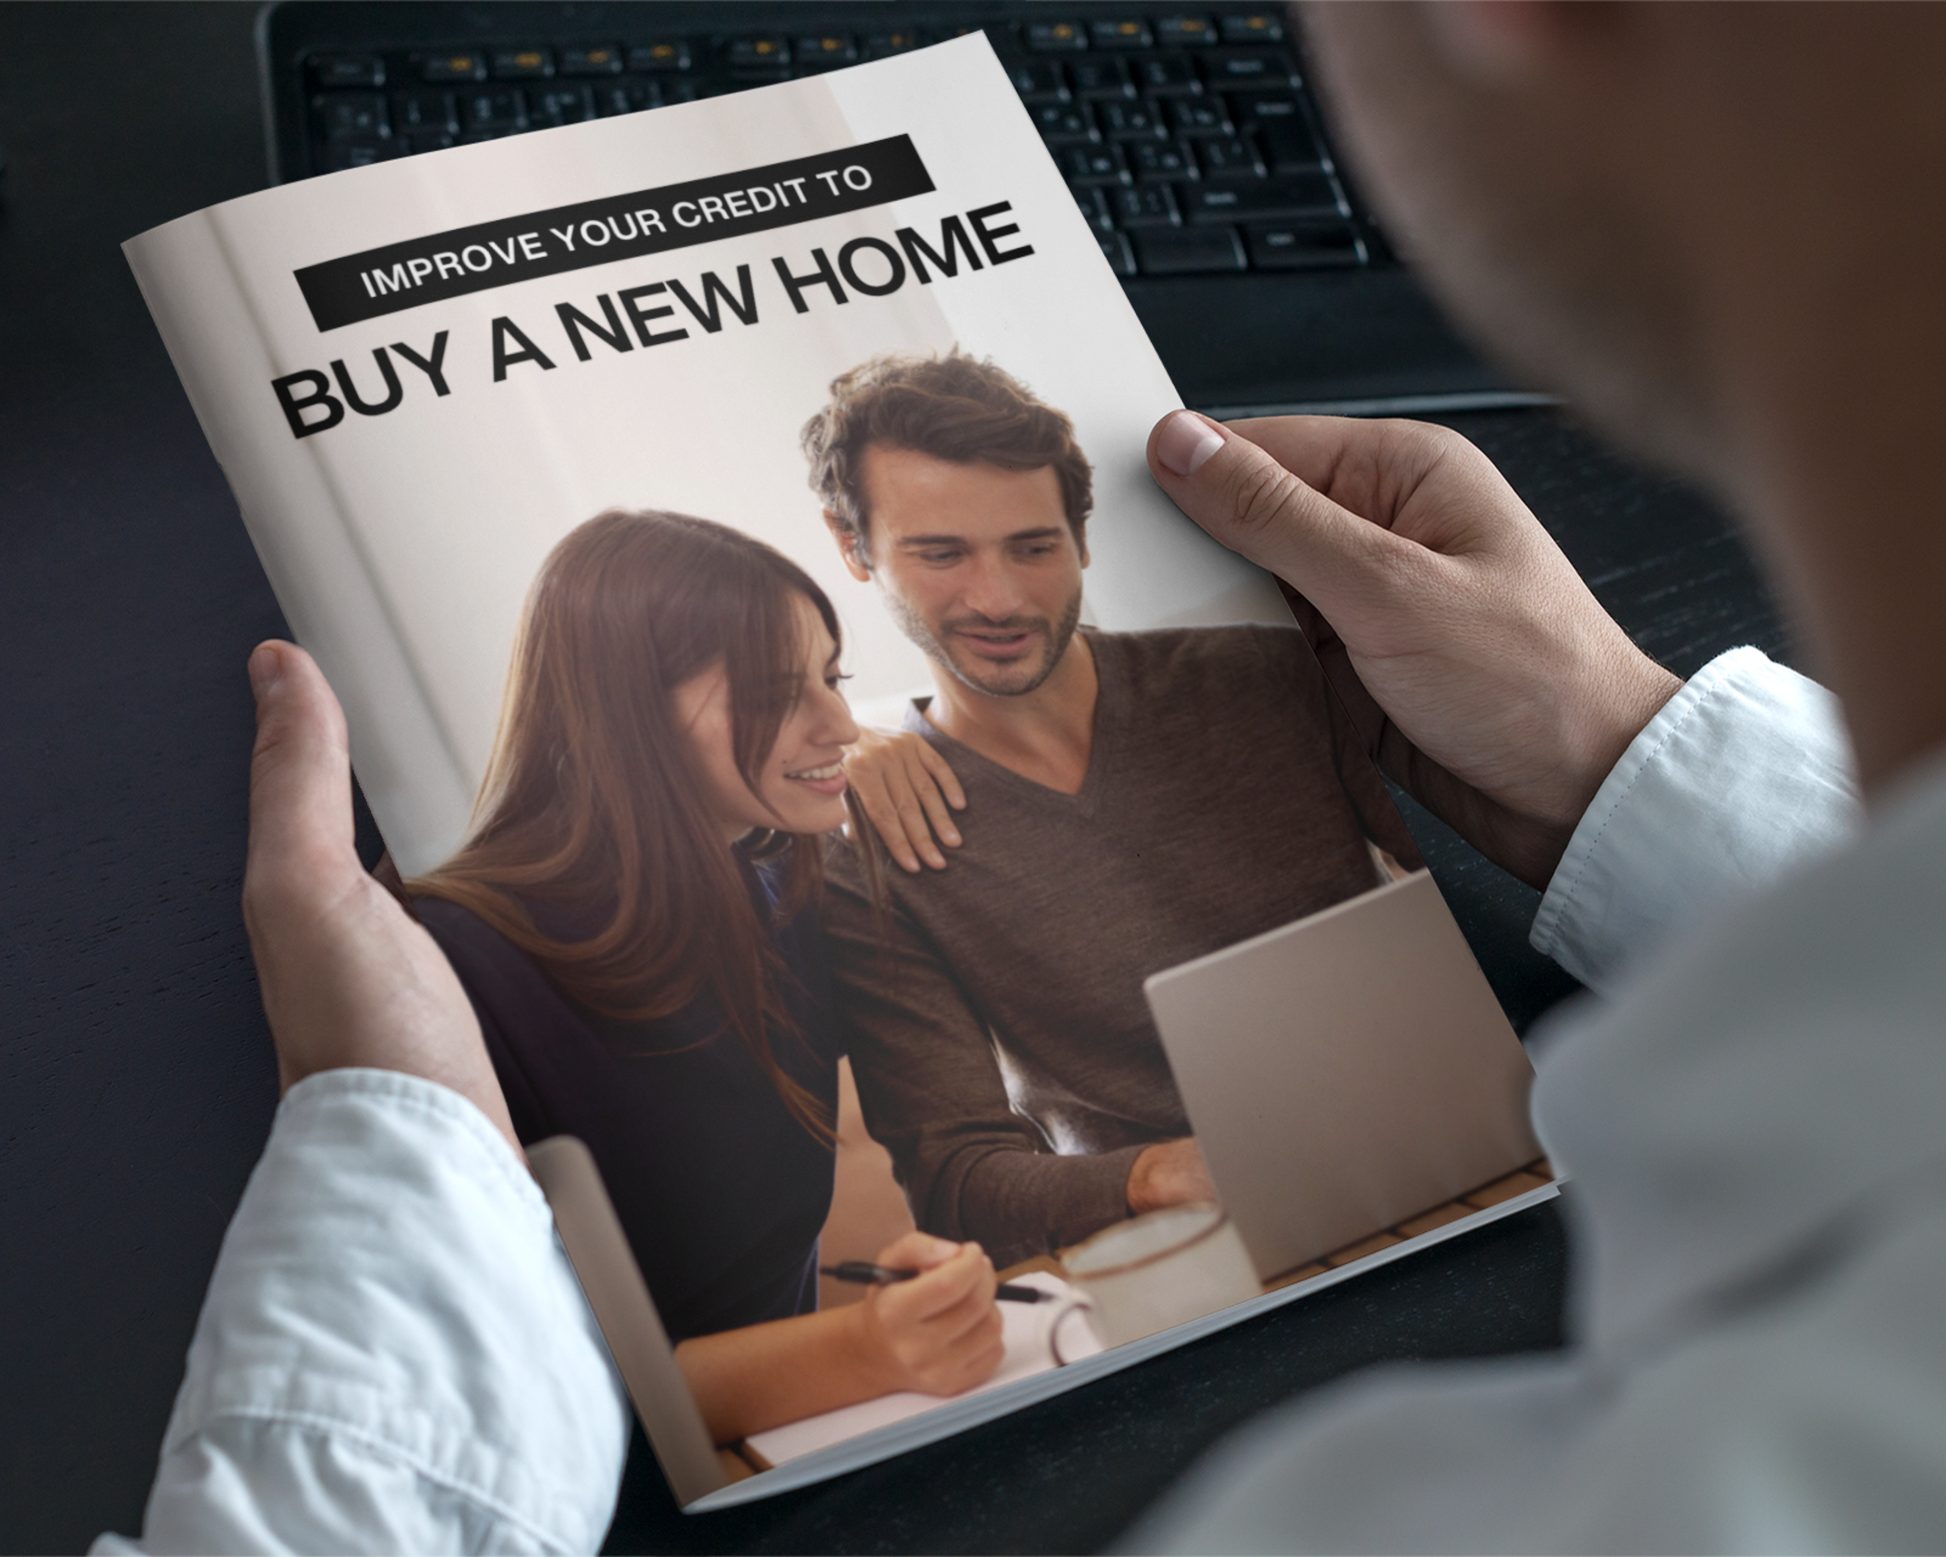 Improve Your Credit, Credit Repair Guide, Credit Repair Template, First Time Home Buyer Guide, Realtor Marketing, Buyer Packet, Realtor Flyer